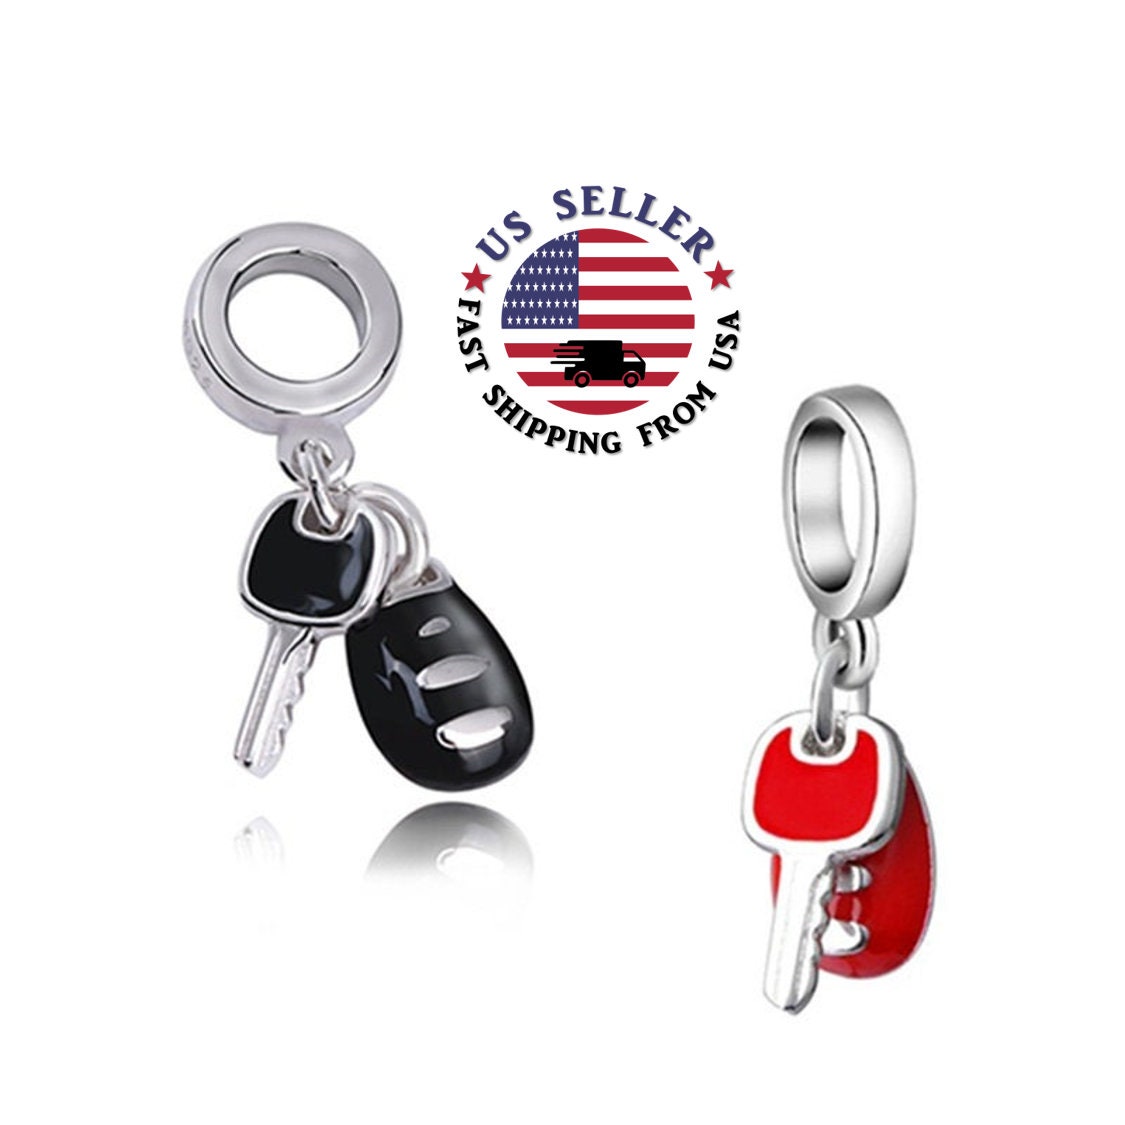 20 Pieces Keyring Key Ring H7OE2 Louisiana Map Tag Keychain Automotive Car  Door Key Tags Findings Charms Chains